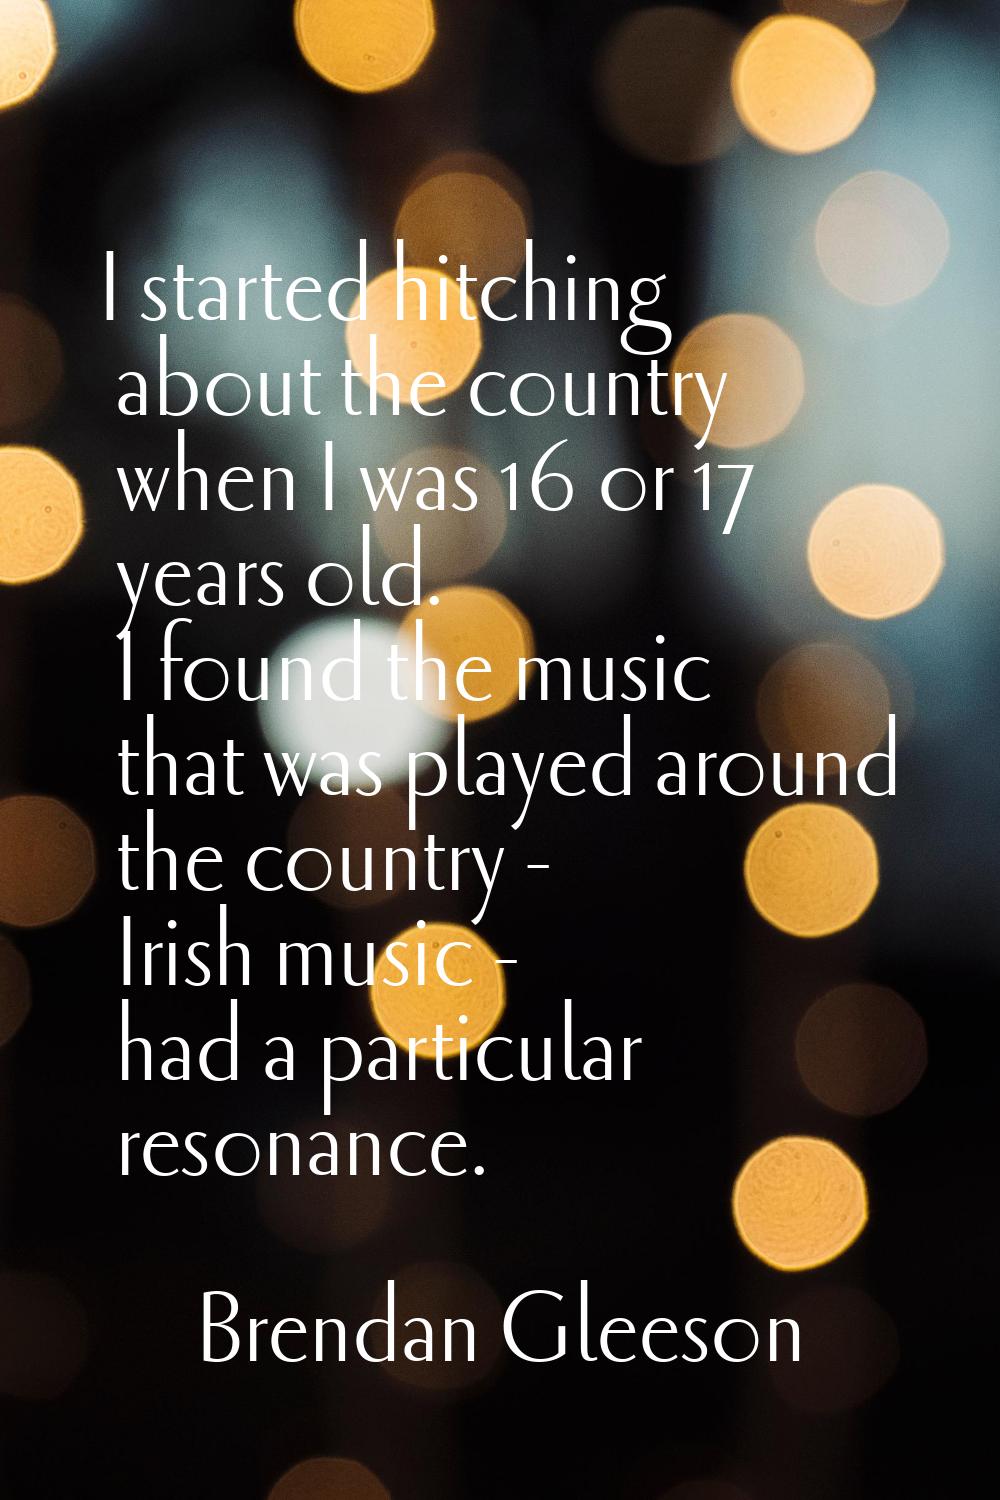 I started hitching about the country when I was 16 or 17 years old. I found the music that was play